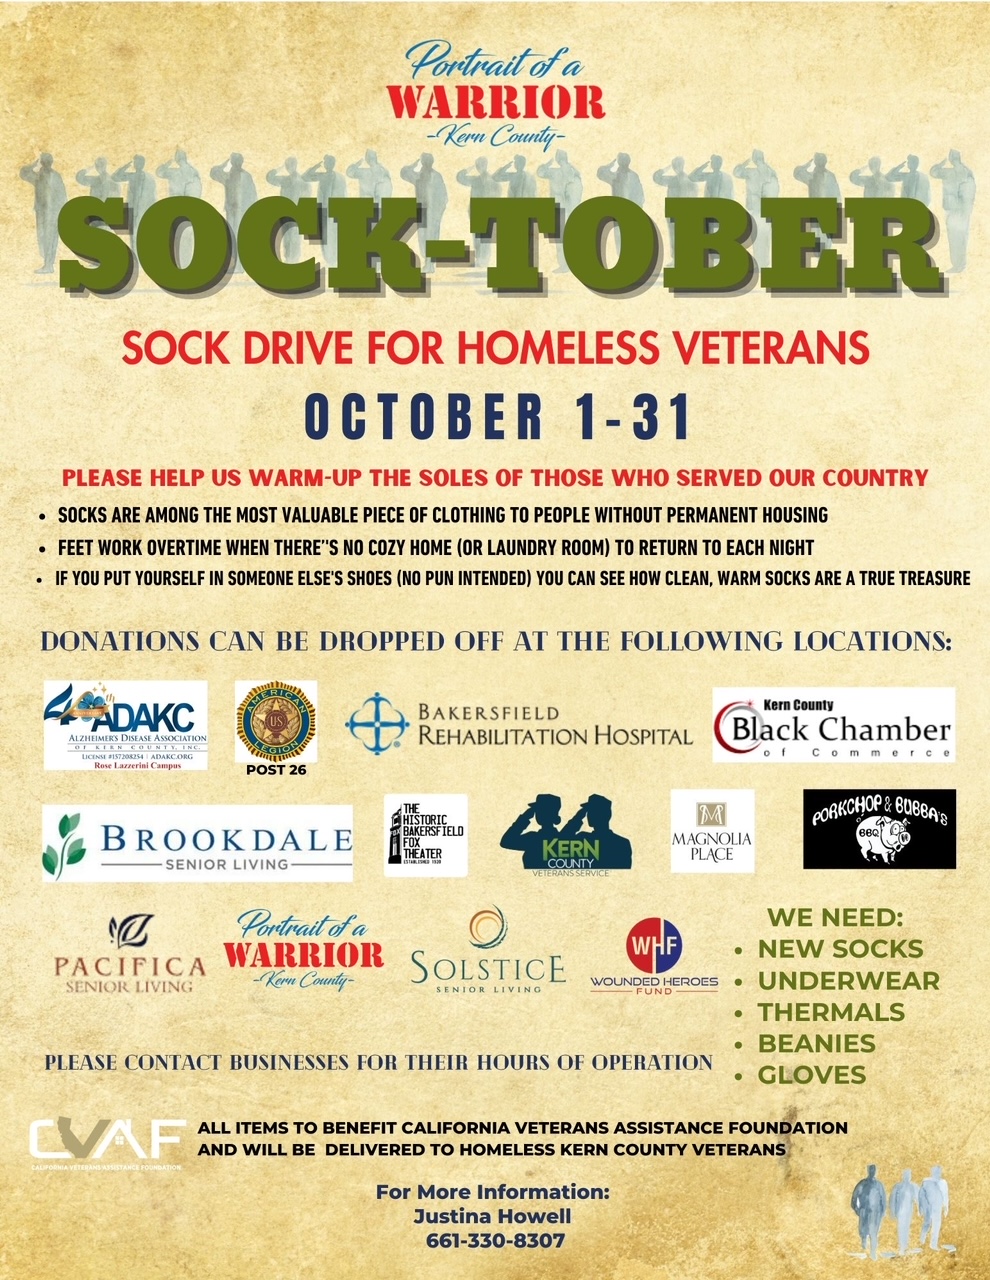 CVAF & Portrait of A Warrior Teaming Up For 4th Annual Socktober Clothes Drive